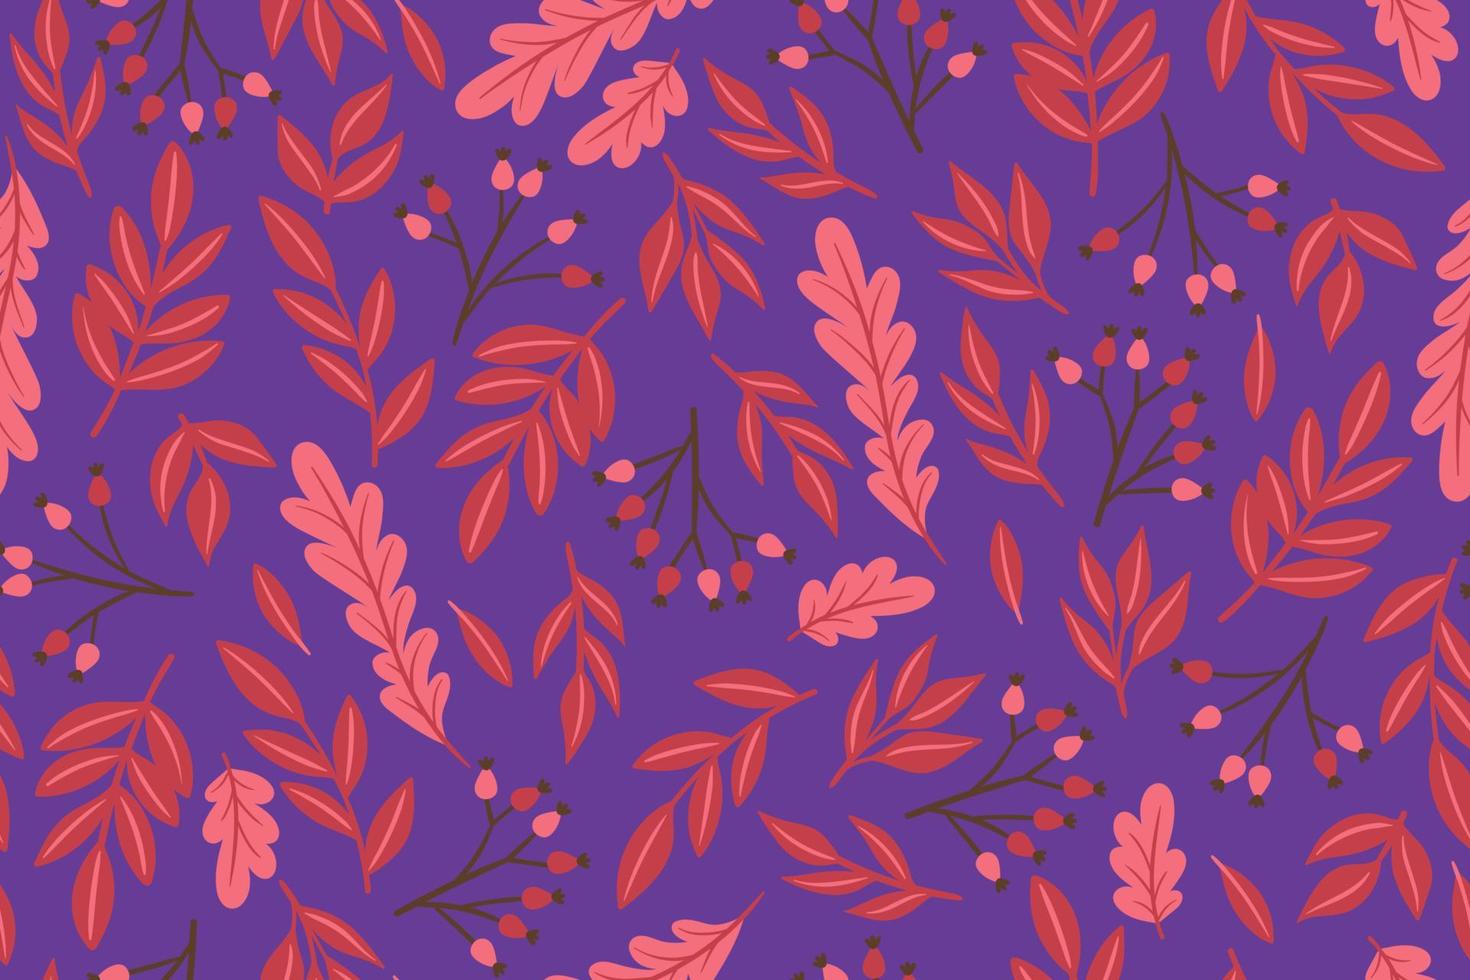 Seamless pattern with autumn leaves and berries. Vector graphics.